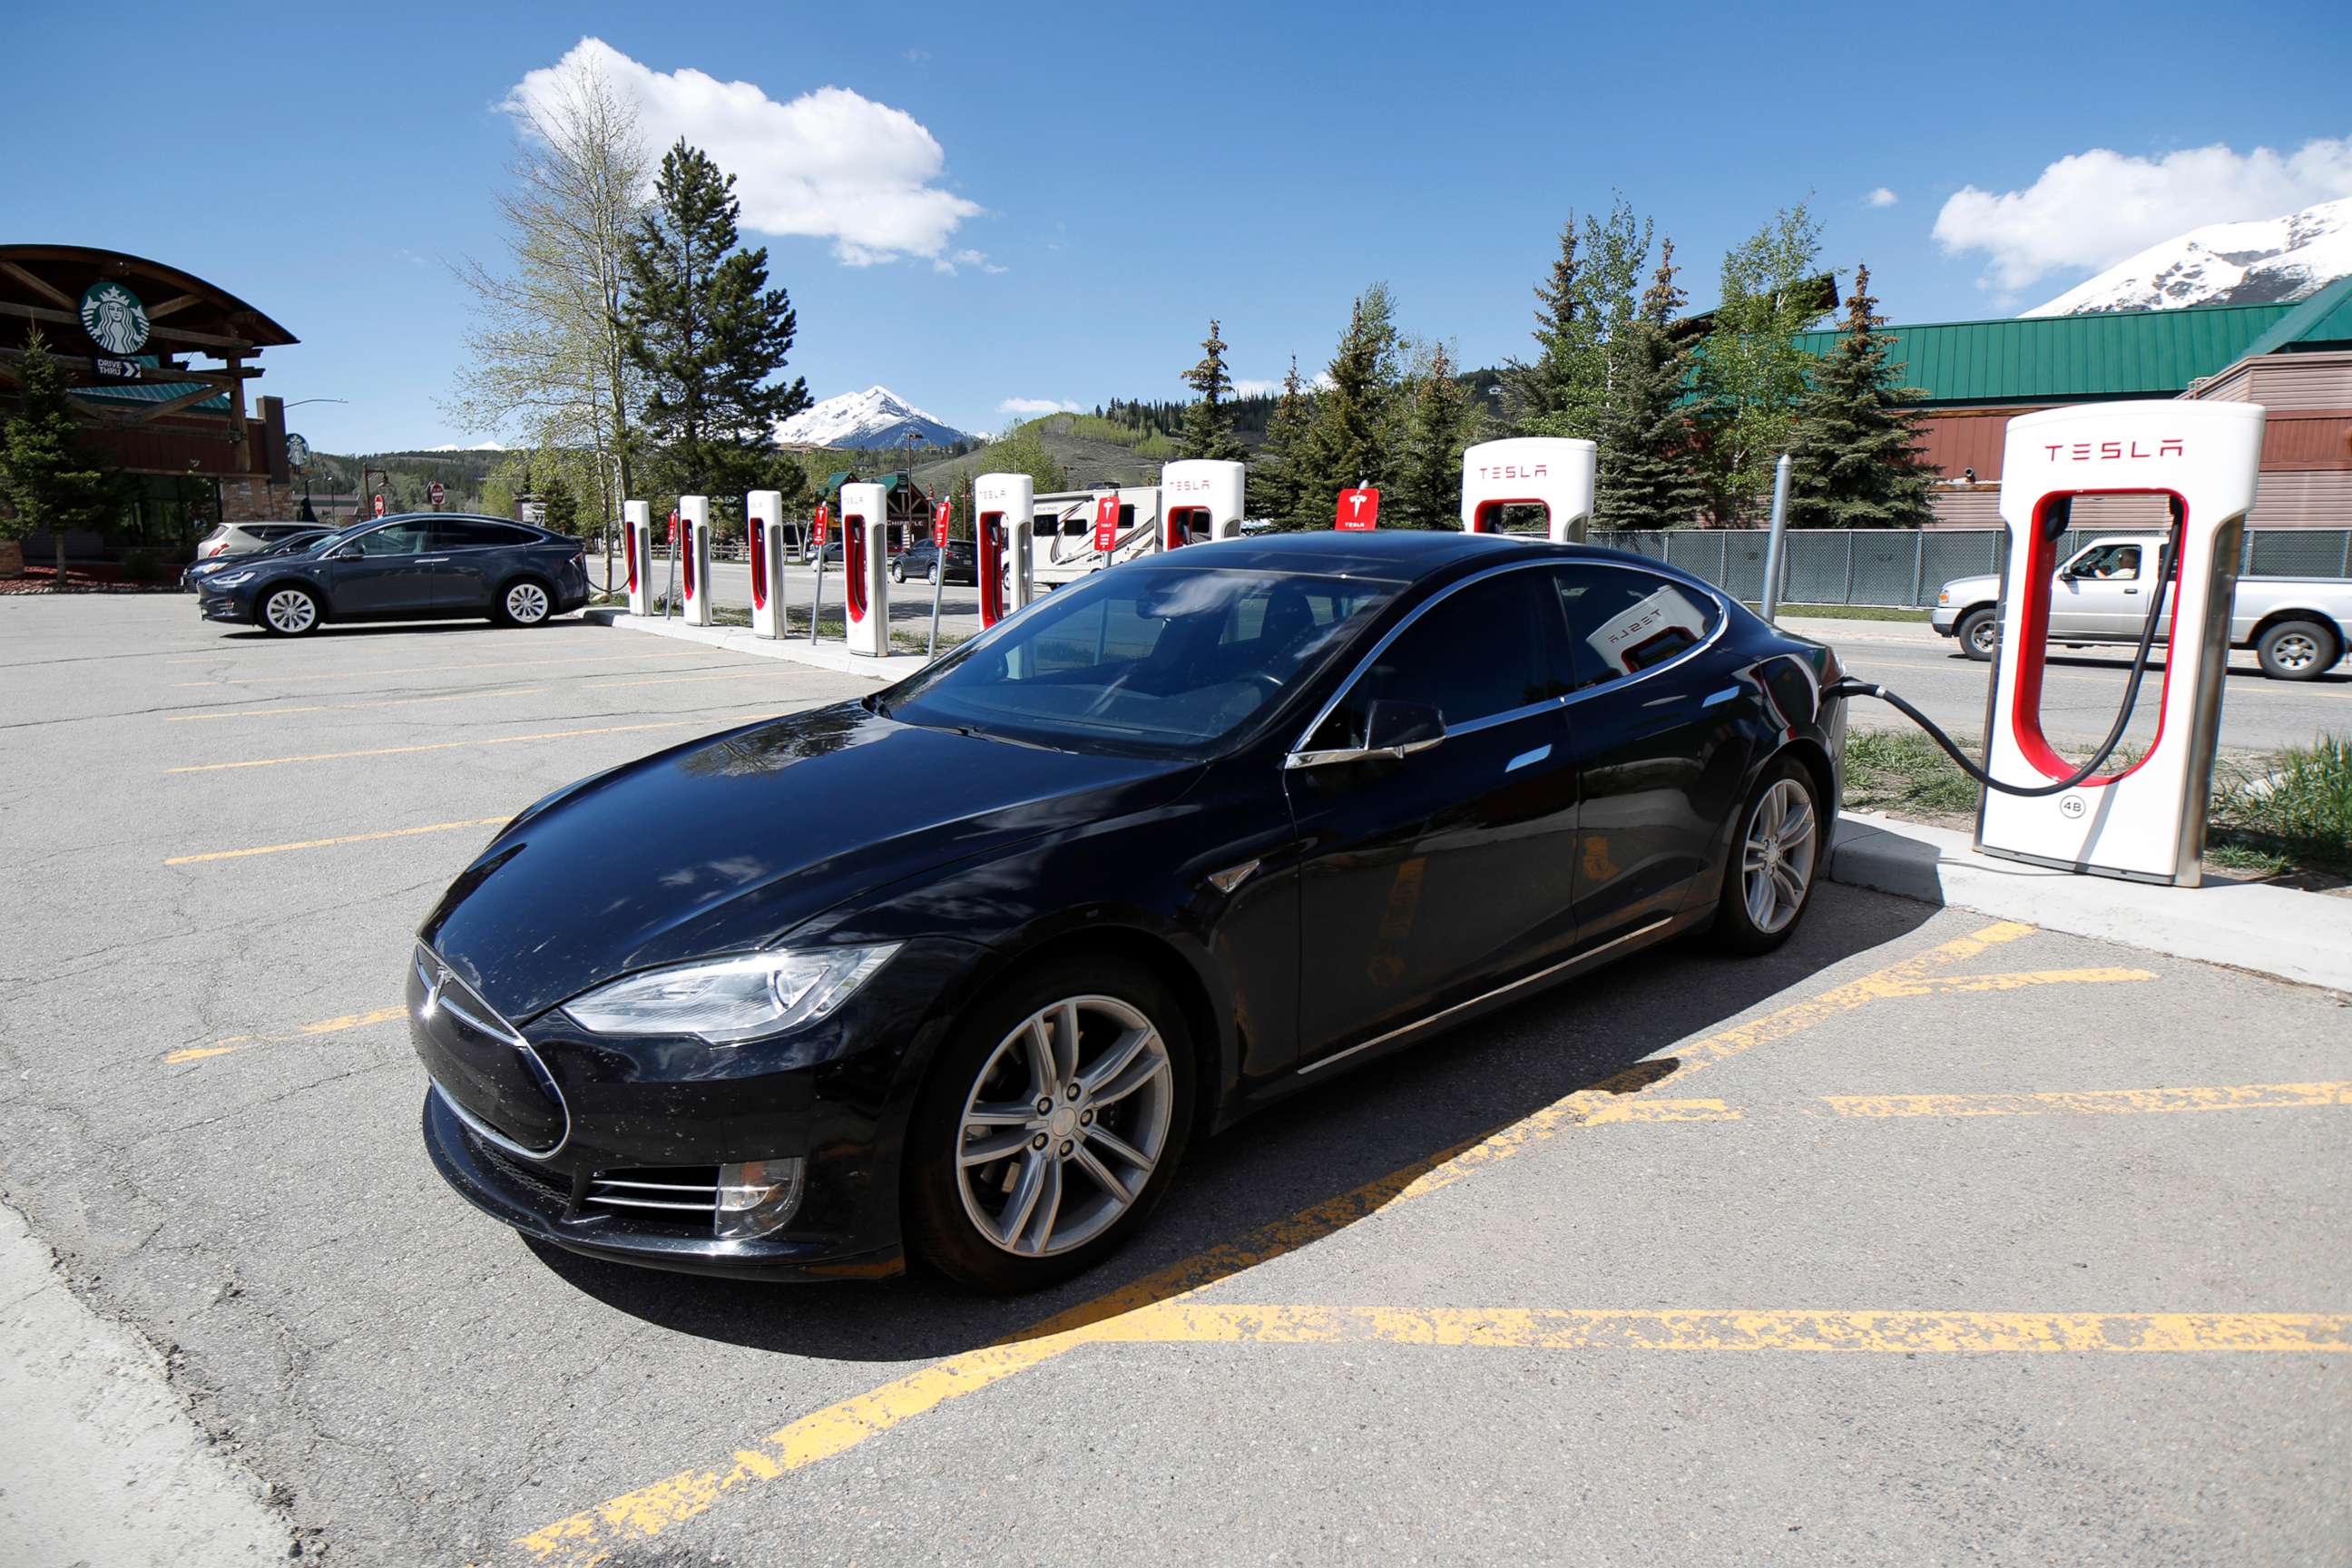 PHOTO: A Tesla Model S sedan charges at a supercharging station in Silverthorne, Colo. on June 8, 2019.